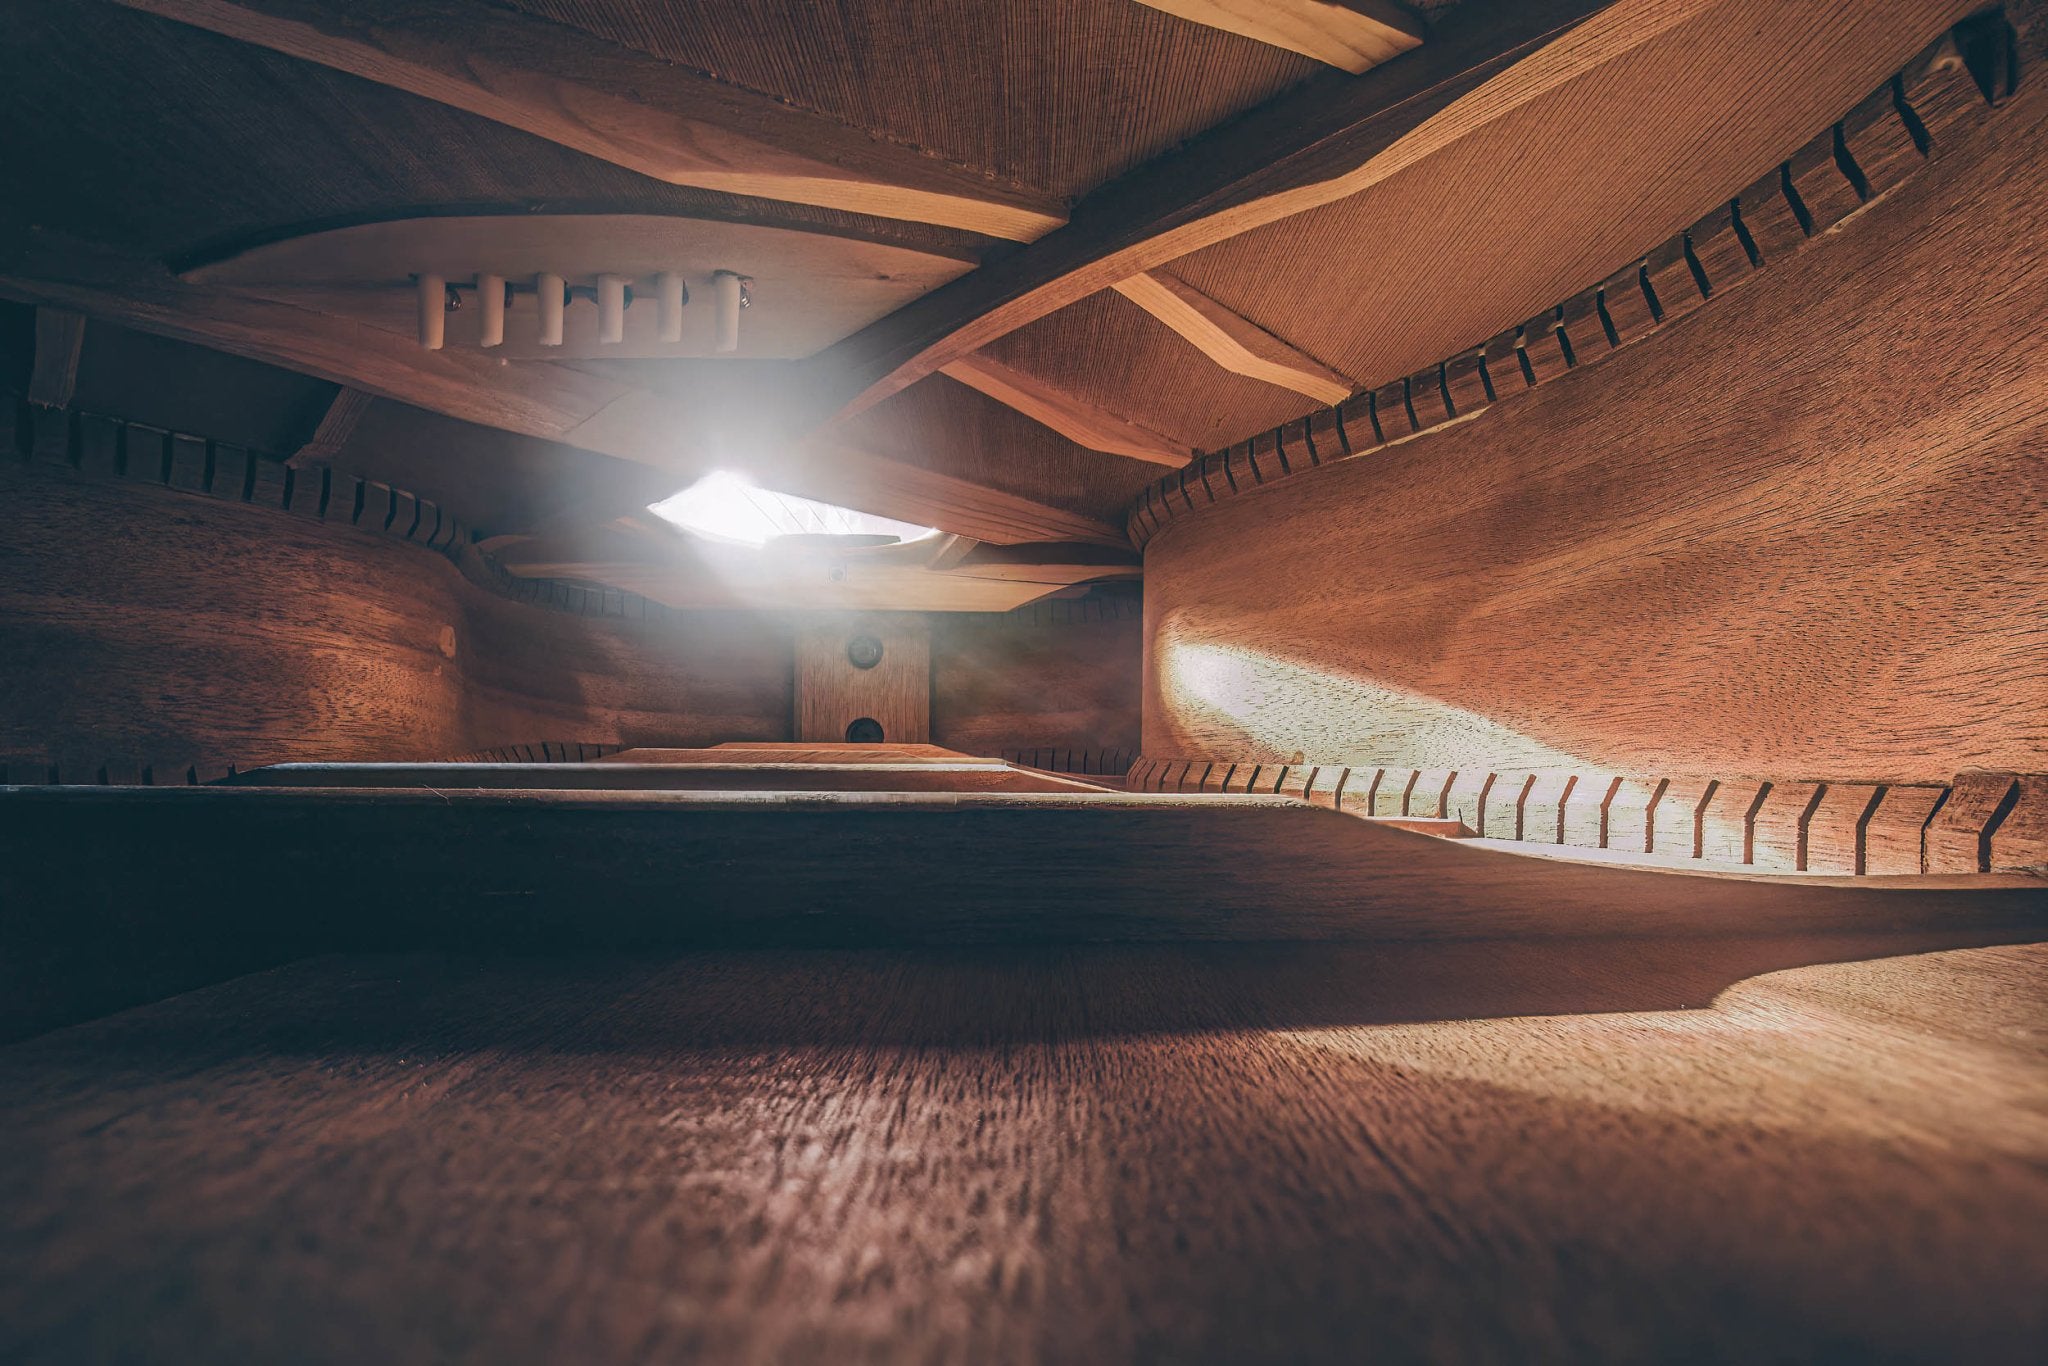 Photo of Inside an Acoustic Guitar, Part 1. Signed Limited Edition Museum Quality Print. - Giclée Museum Quality Print - Architecture In Music